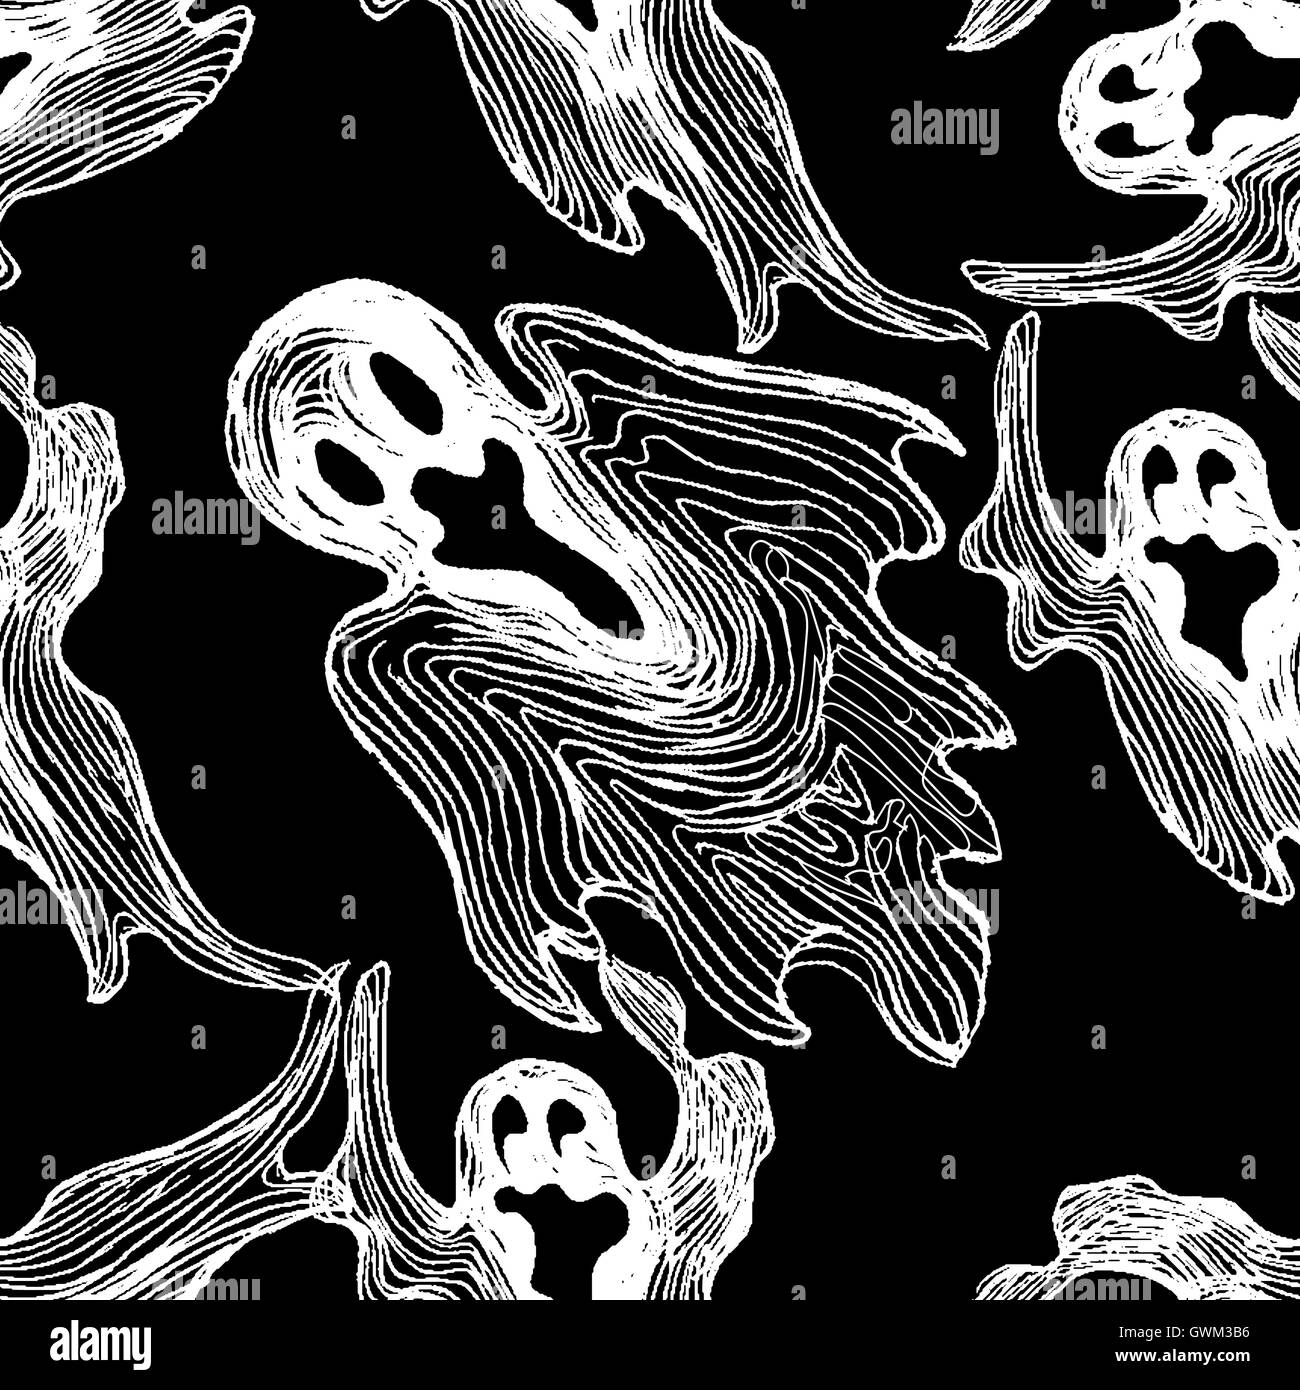 Ghost seamless pattern in black and white. Stock Photo